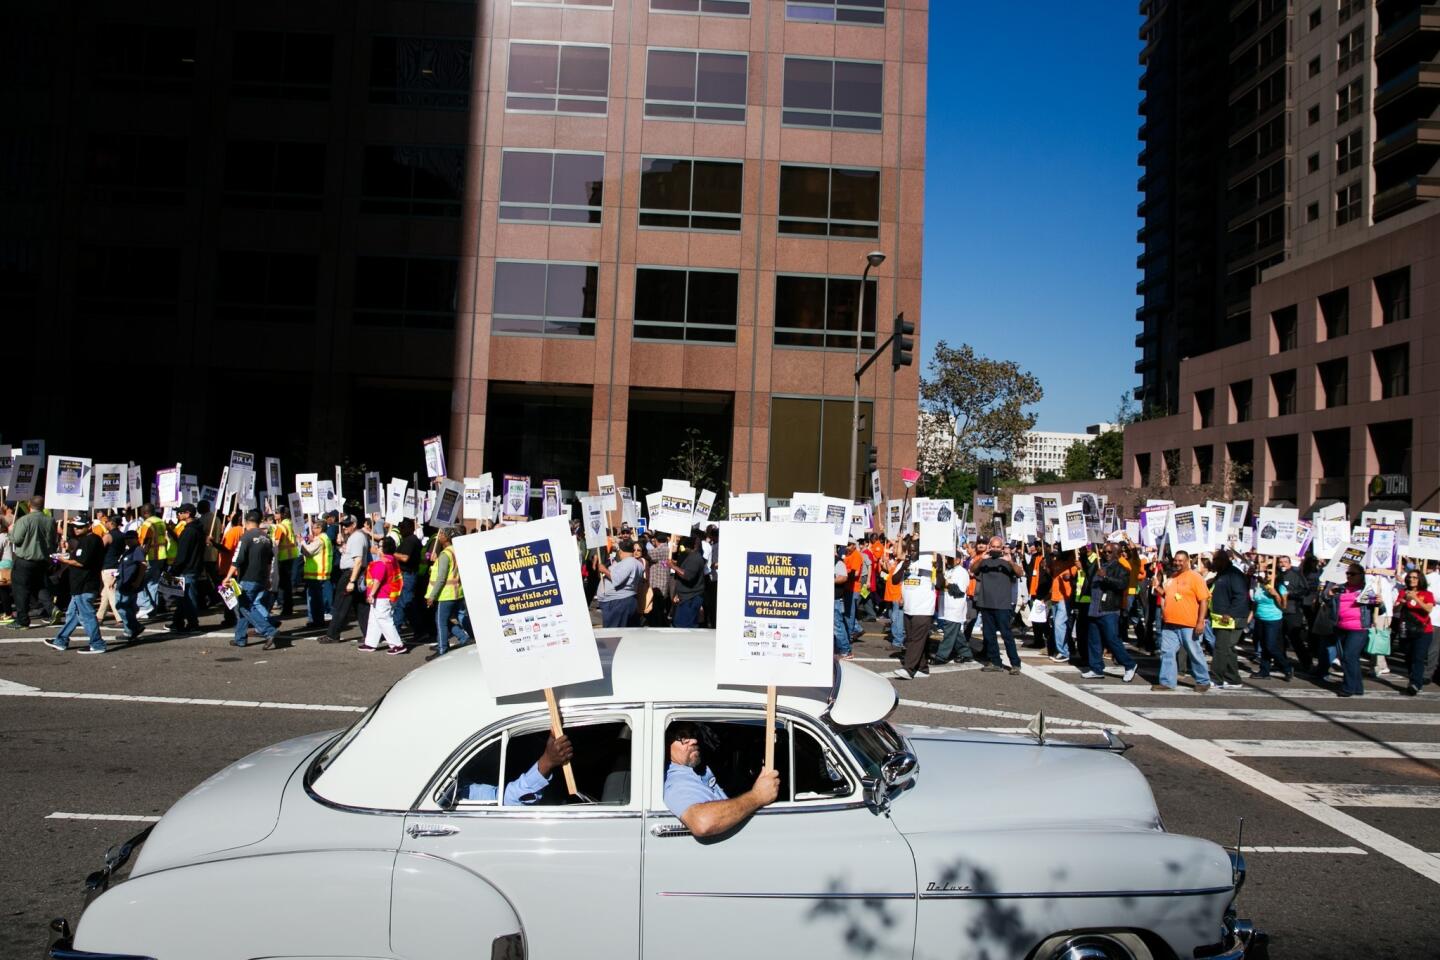 Jose Orozco drives his 1950's Chevy Bel Air with his friends to support members of the Coalition of L.A. City Unions as they march toward City Hall, under the banner, "We're Bargaining to Fix LA,."